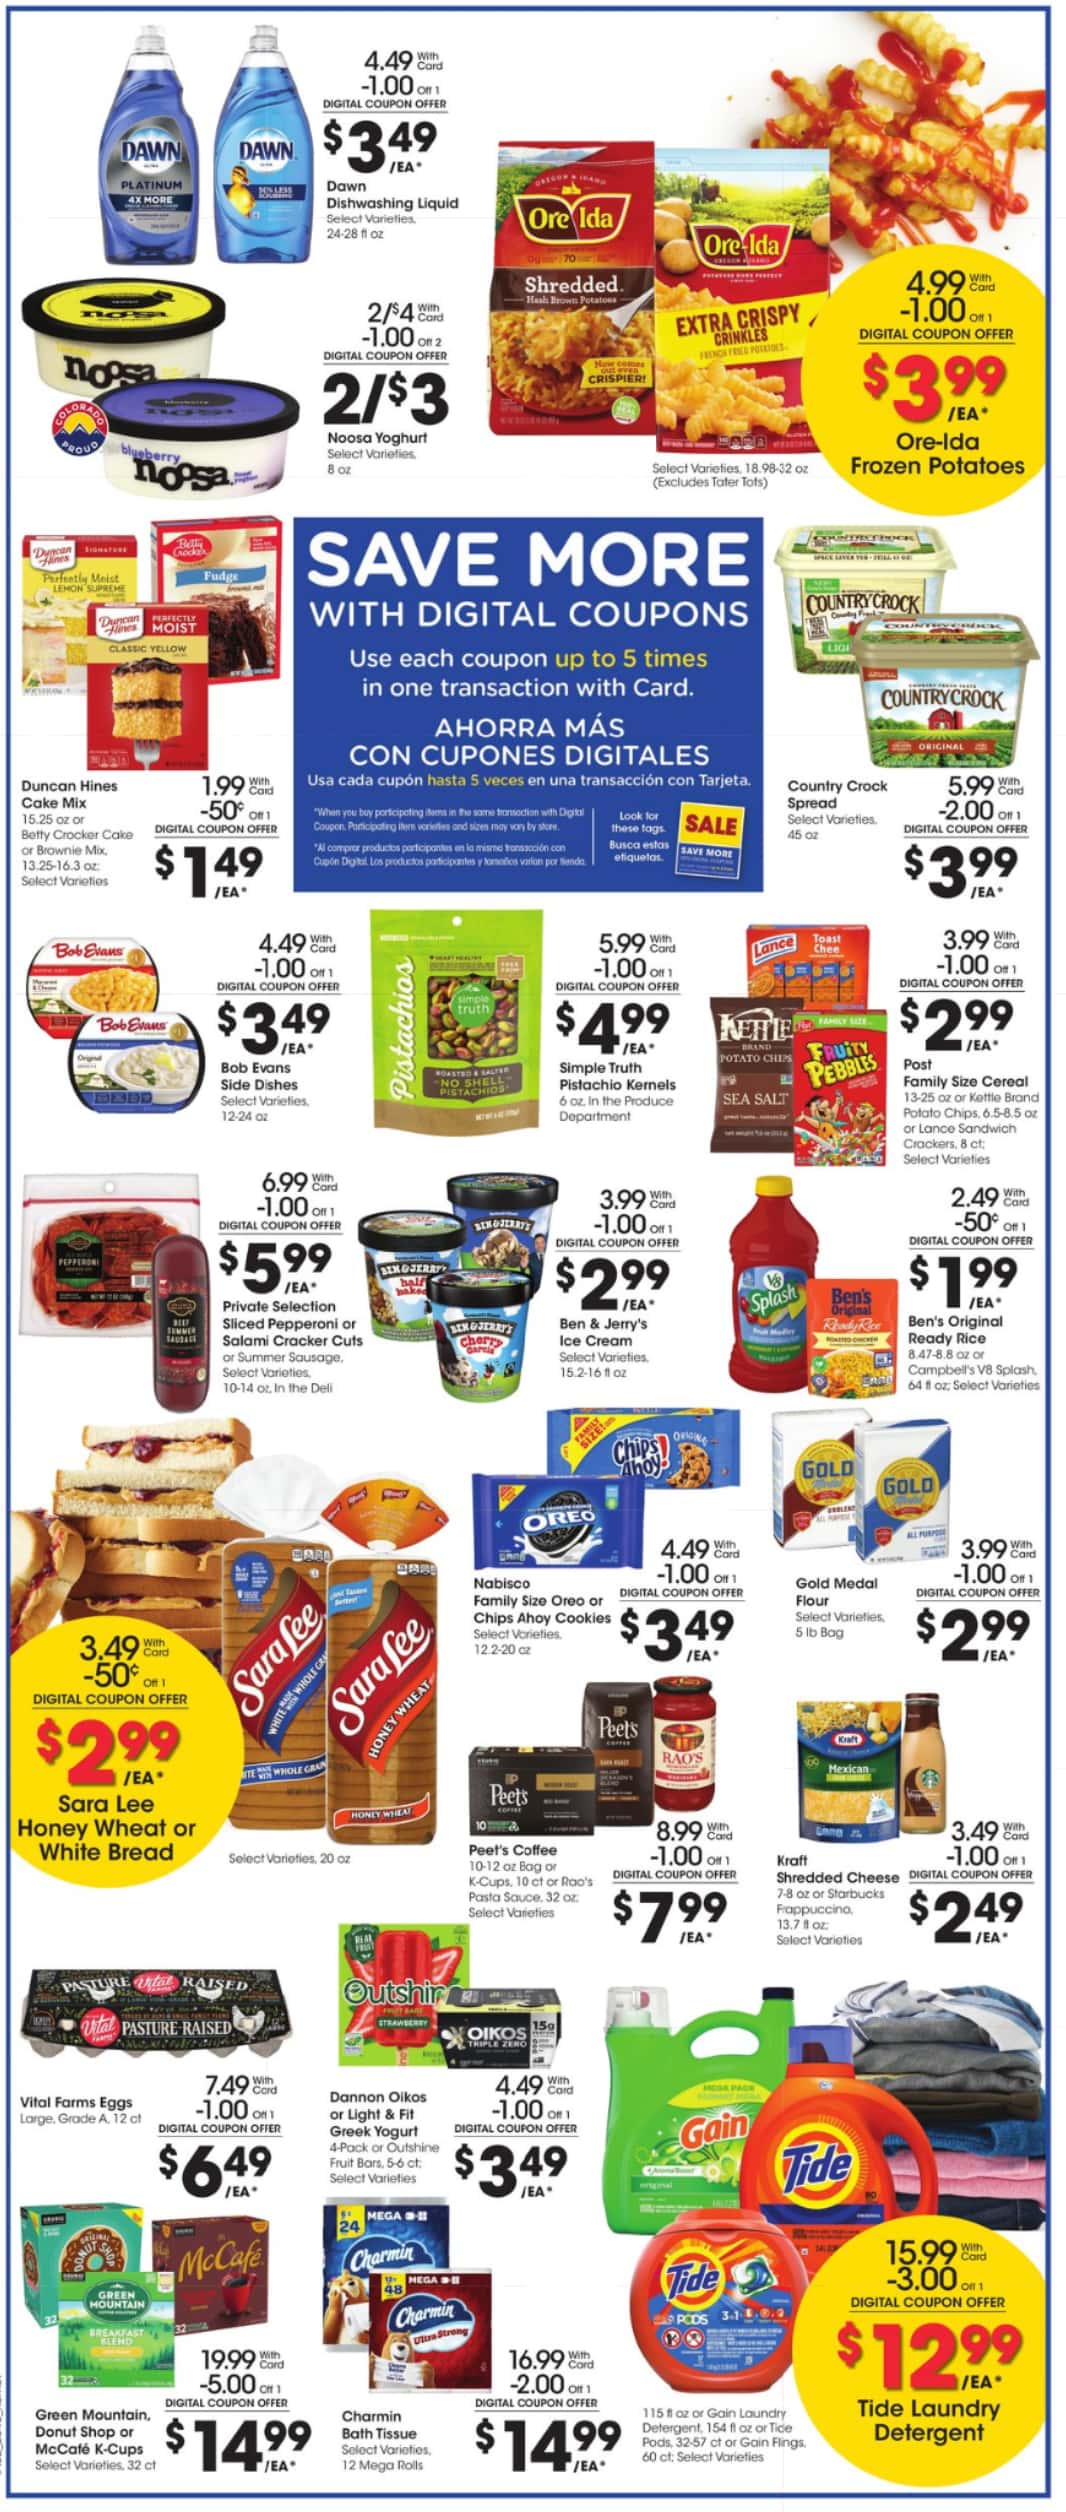 King Soopers Black Friday July 2024 Weekly Sales, Deals, Discounts and Digital Coupons.